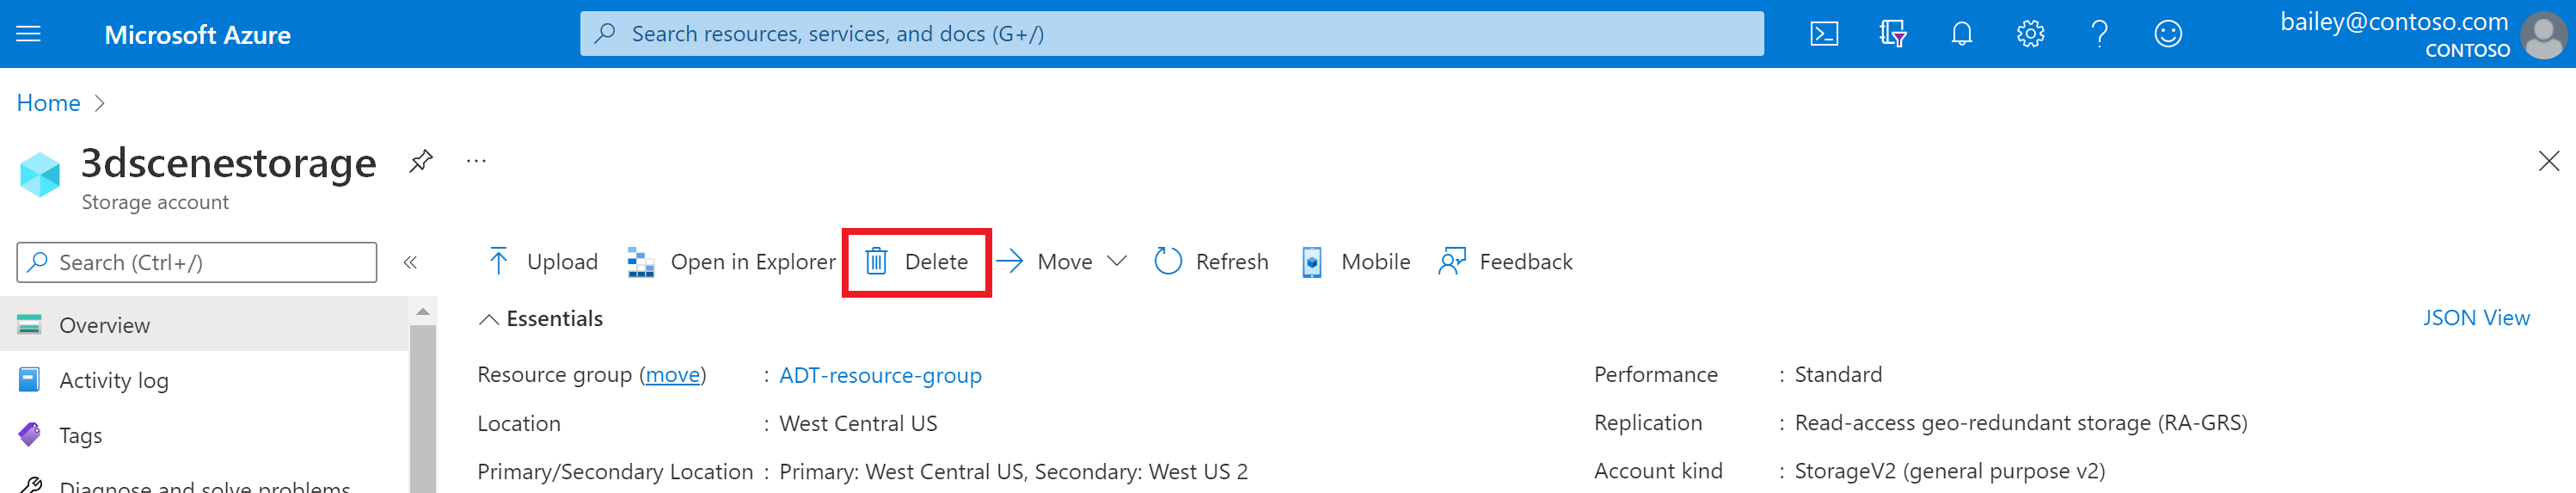 Screenshot of the Overview page for an Azure storage account in the Azure portal. The Delete button is highlighted.